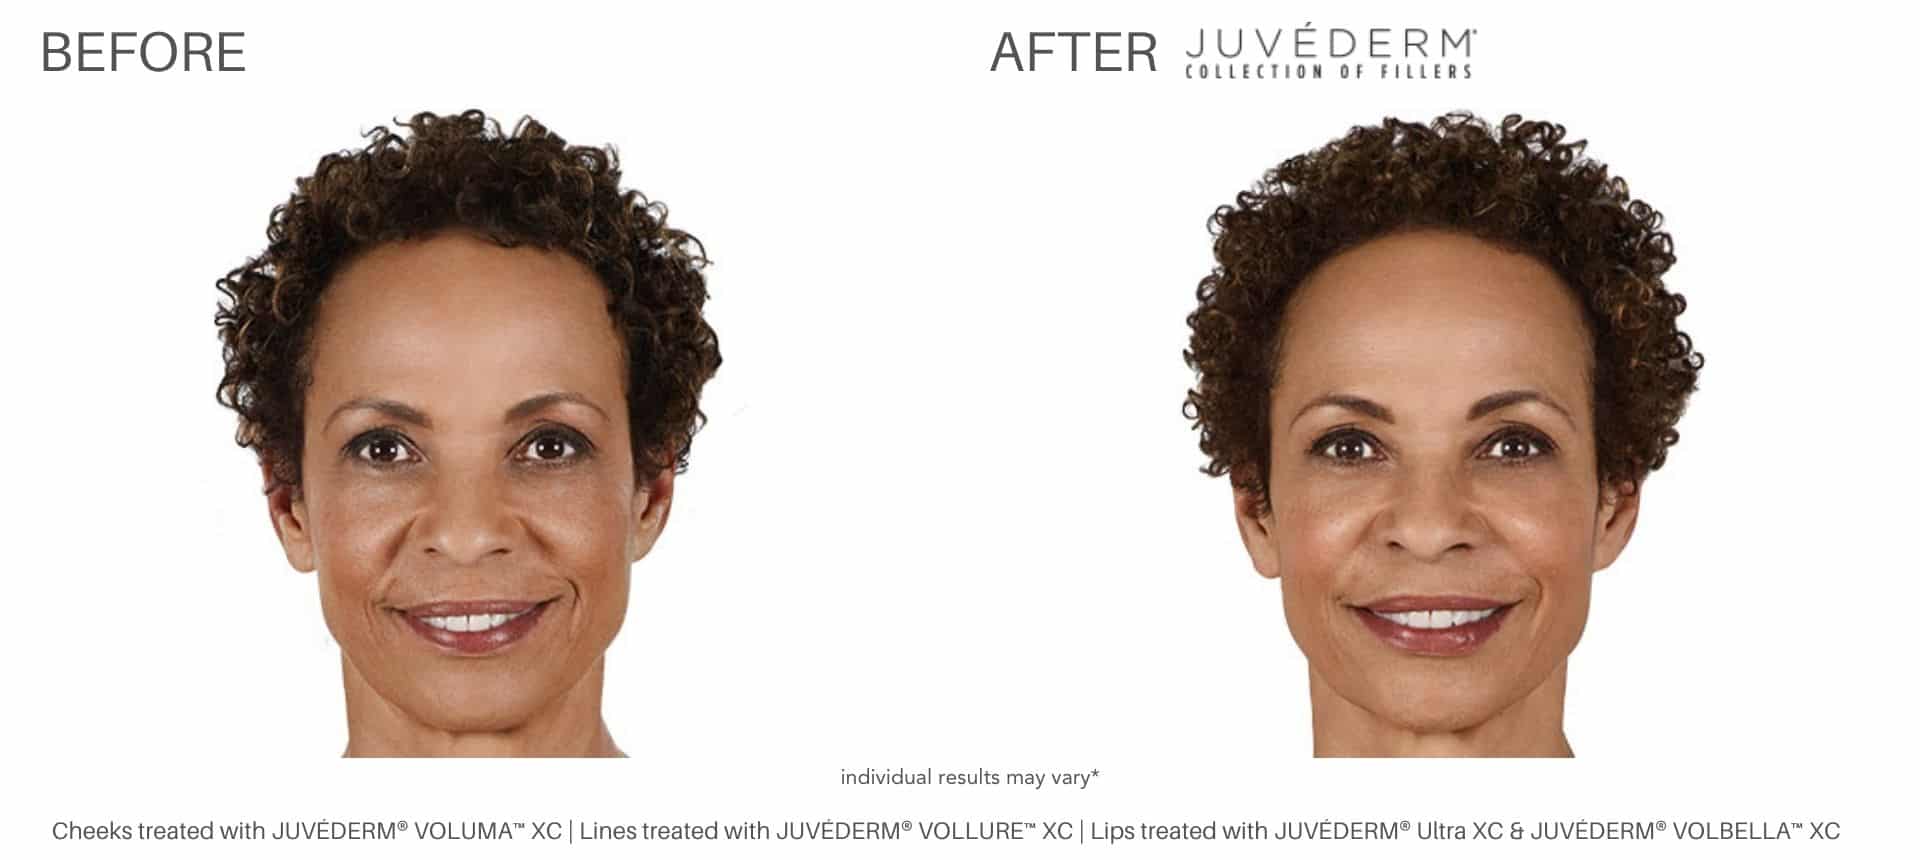 woman's before and after juvderm fillers from health first medical.